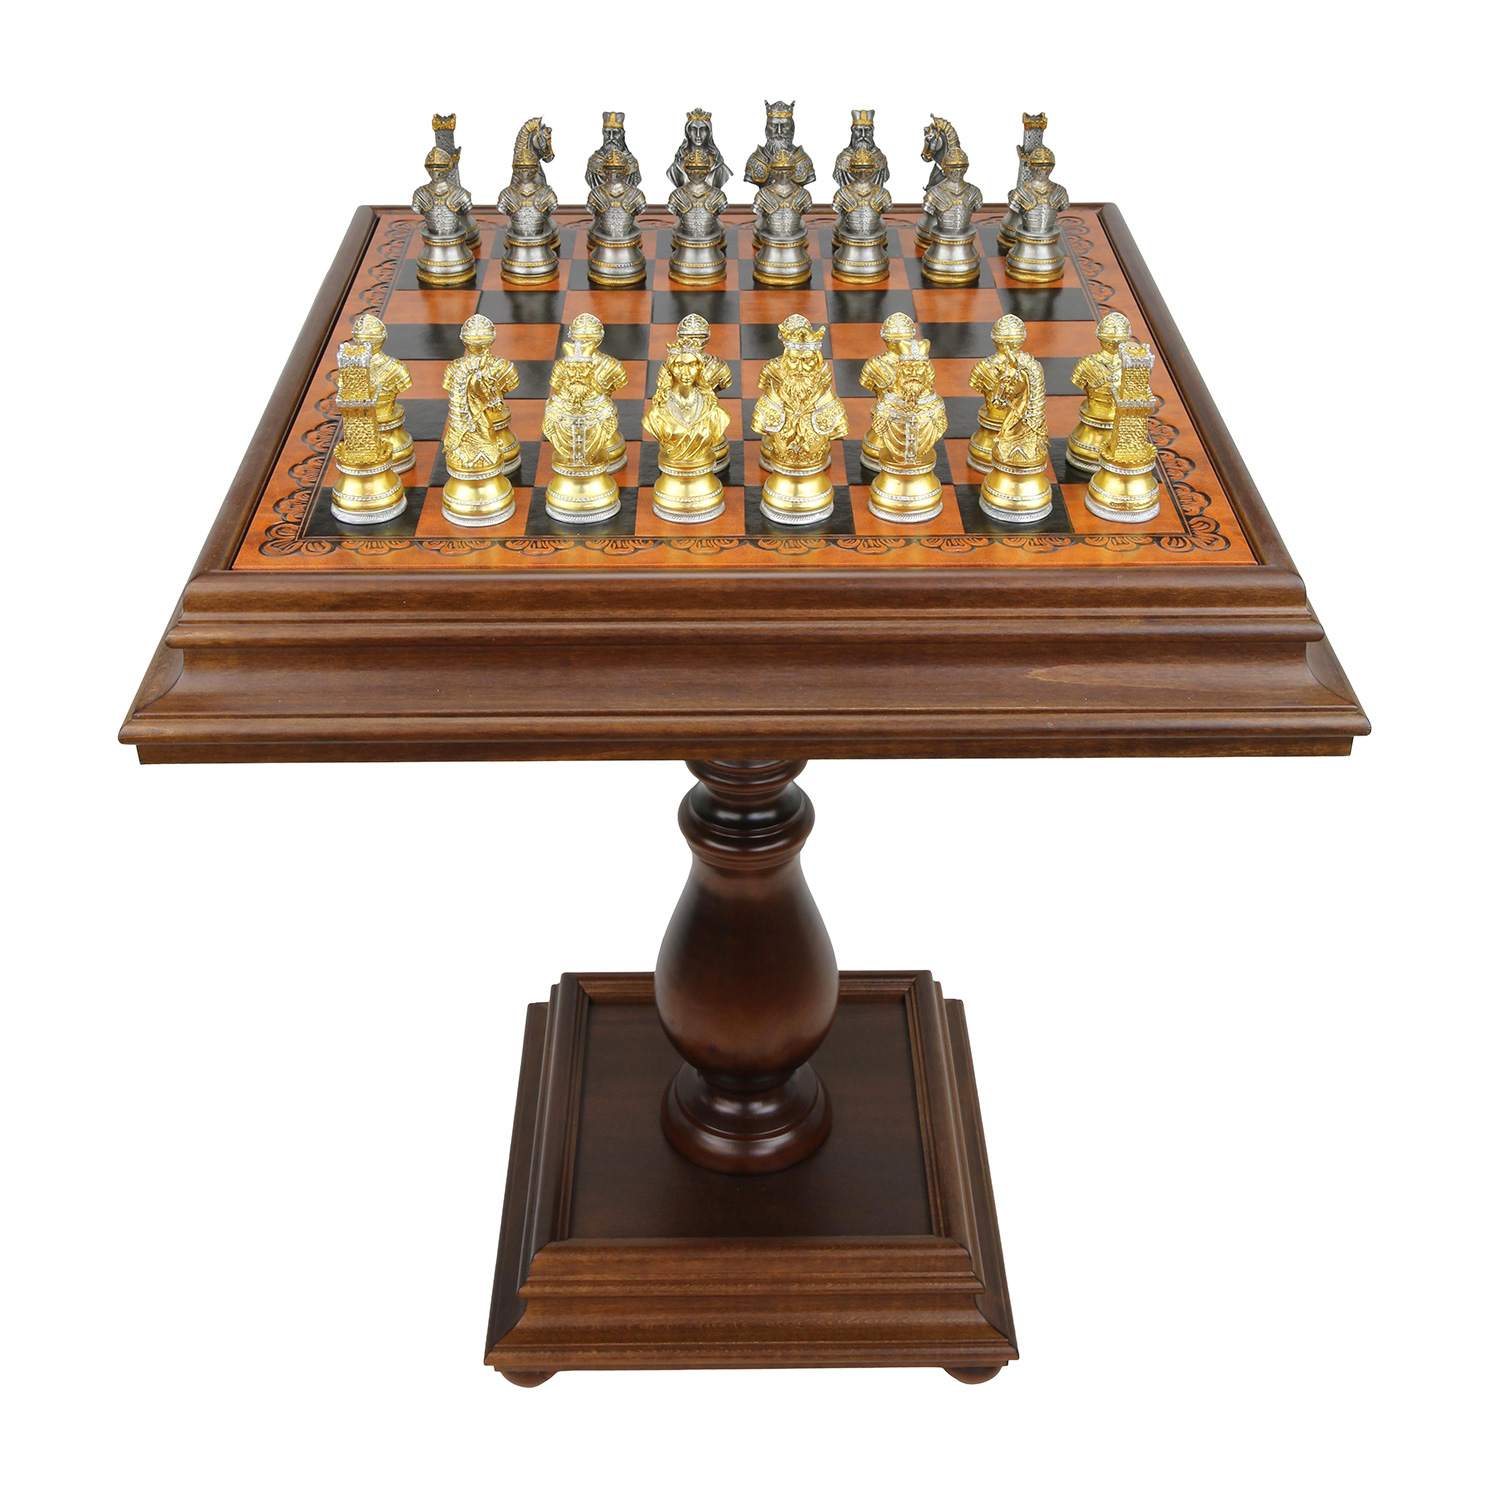 bemanning Grootte Bevriezen Exclusive handmade chess set "Medieval" 600140259 (gold/silver plated,  chess table)